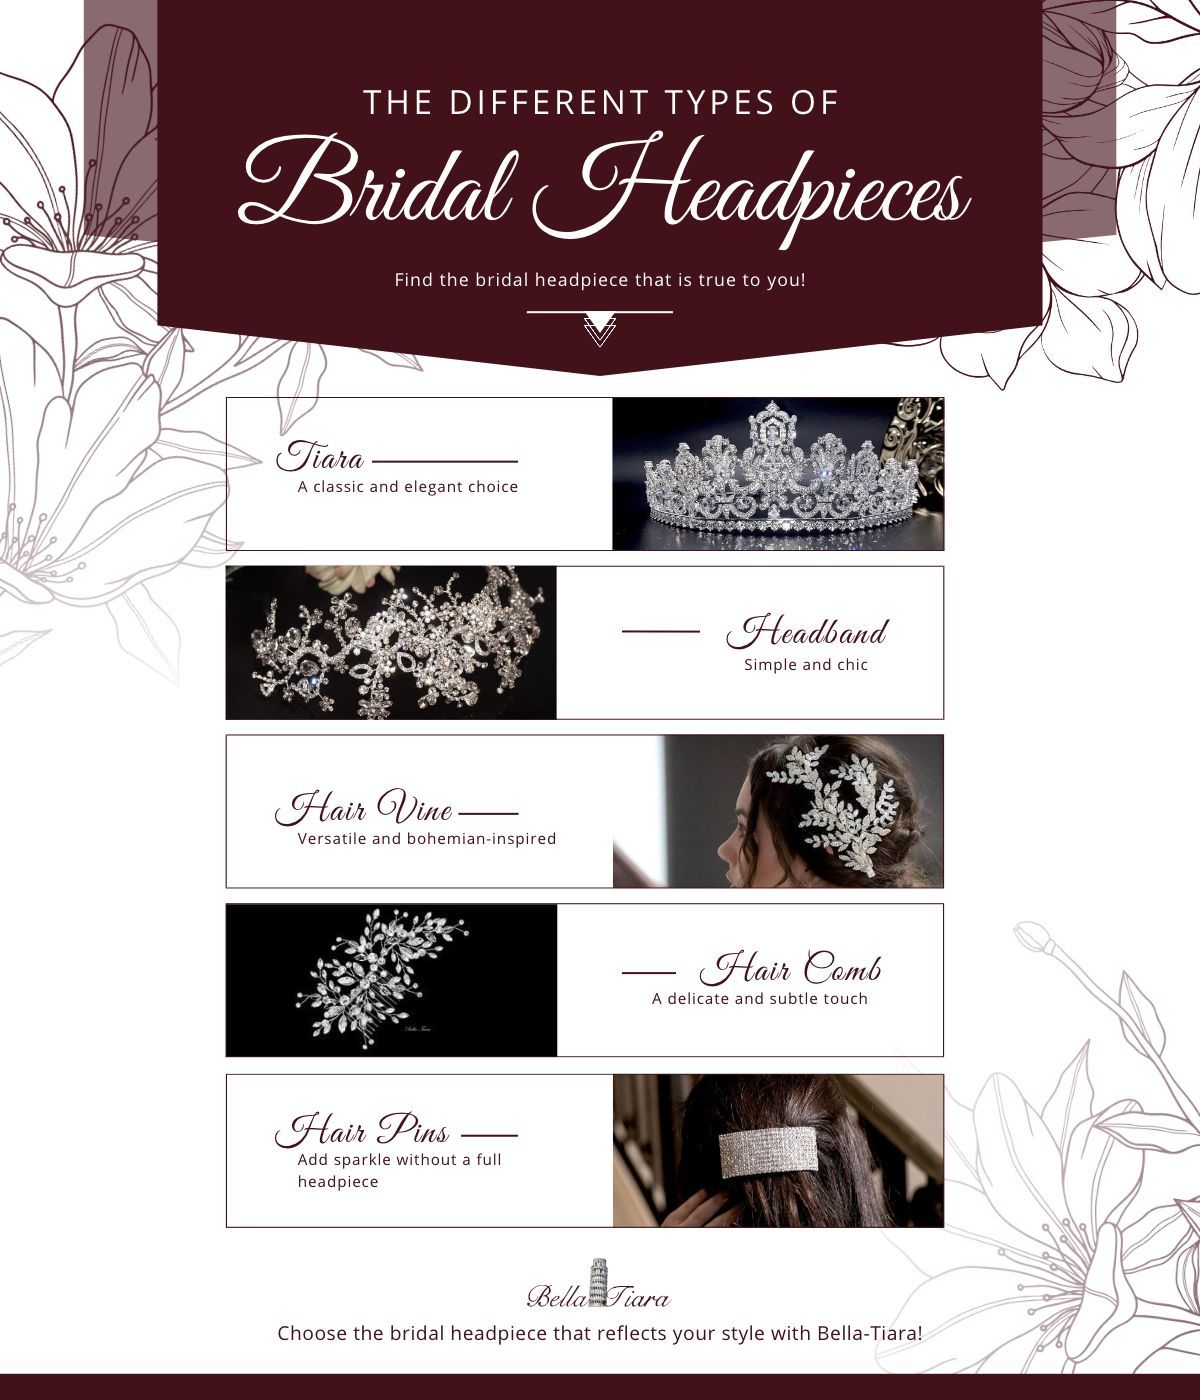 Types of bridal headpieces infographic